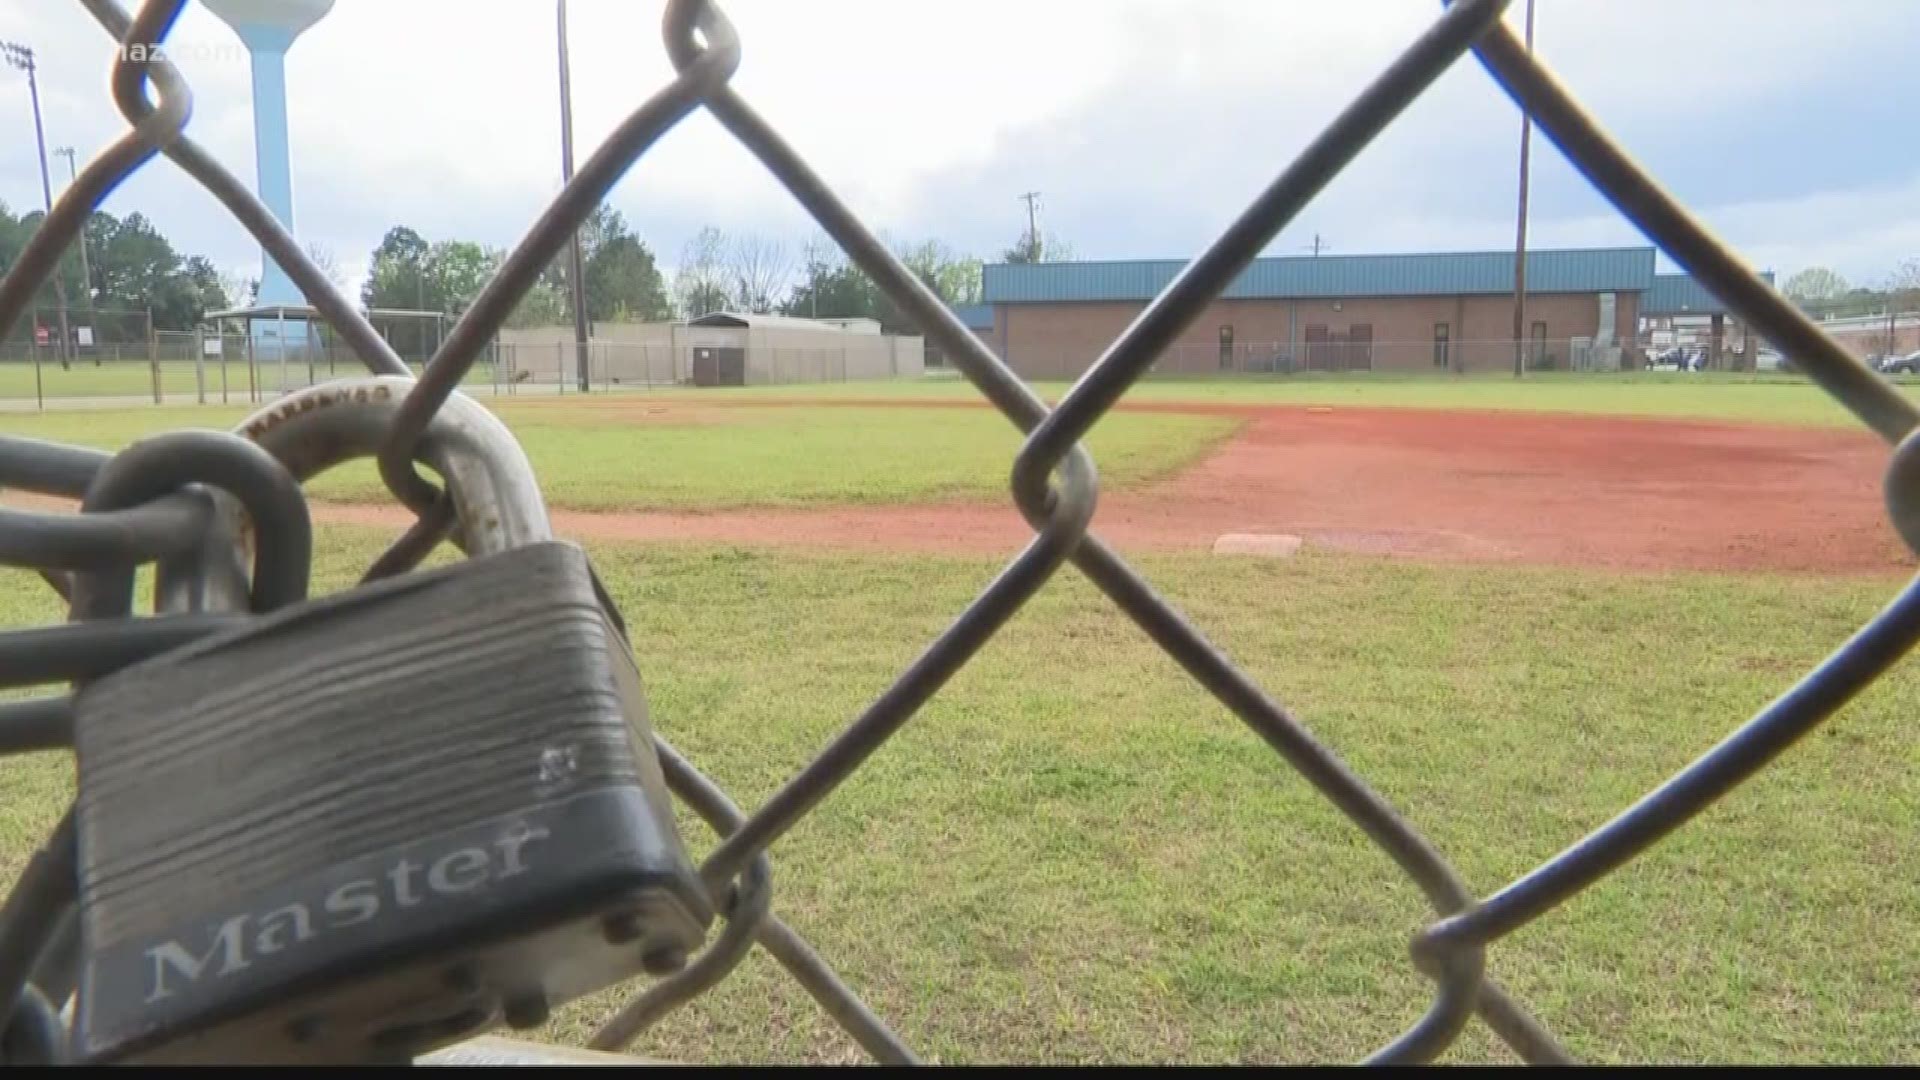 A park in Warner Robins at the center of months of controversy looks like its future might finally be clear. Zach Merchant explains what the Perkins Field project could look like down the road.